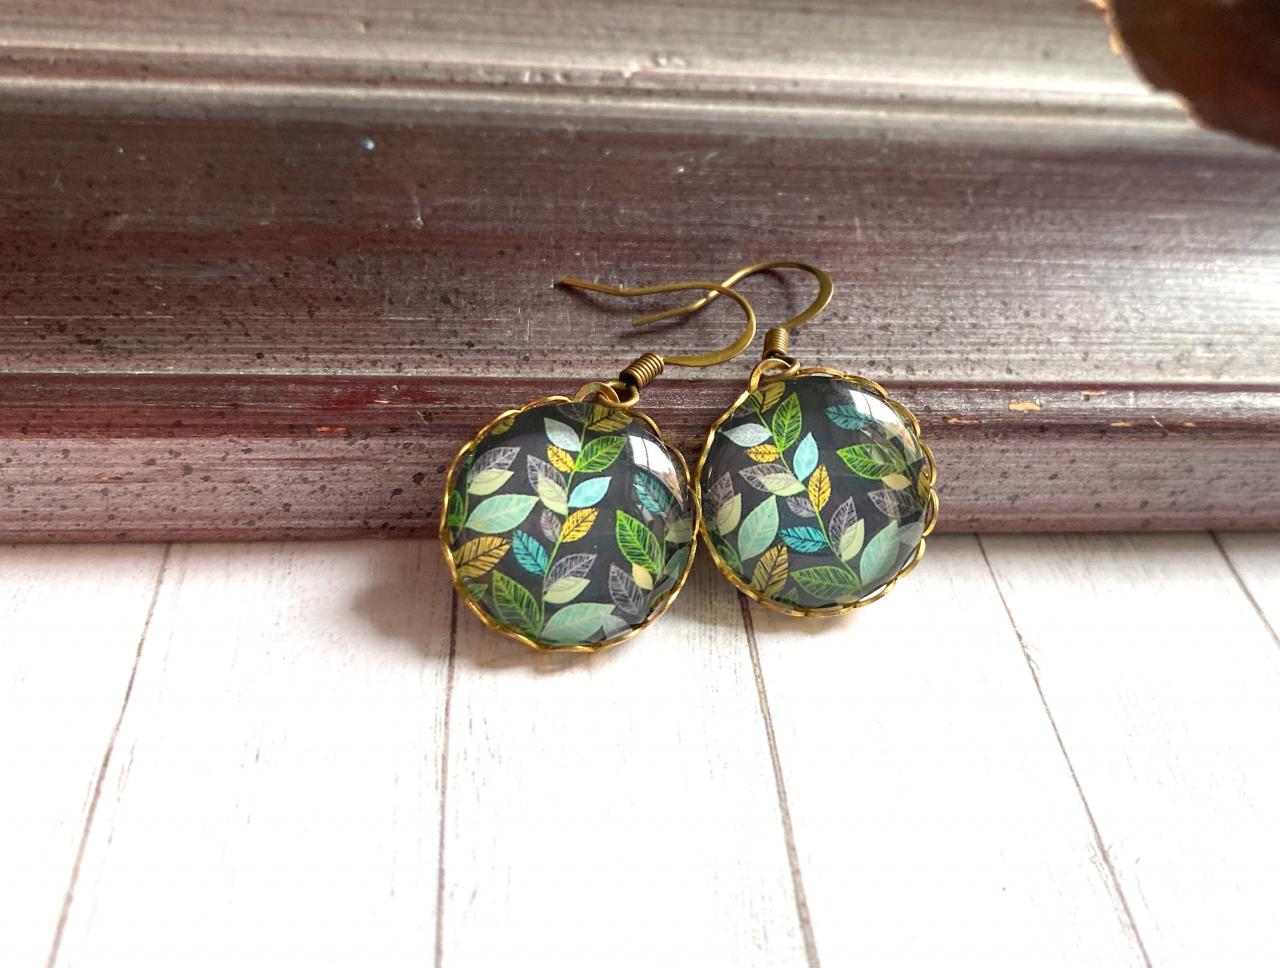 Brass Earrings With Leaf Pendants And Lace Edging, Selma Dreams